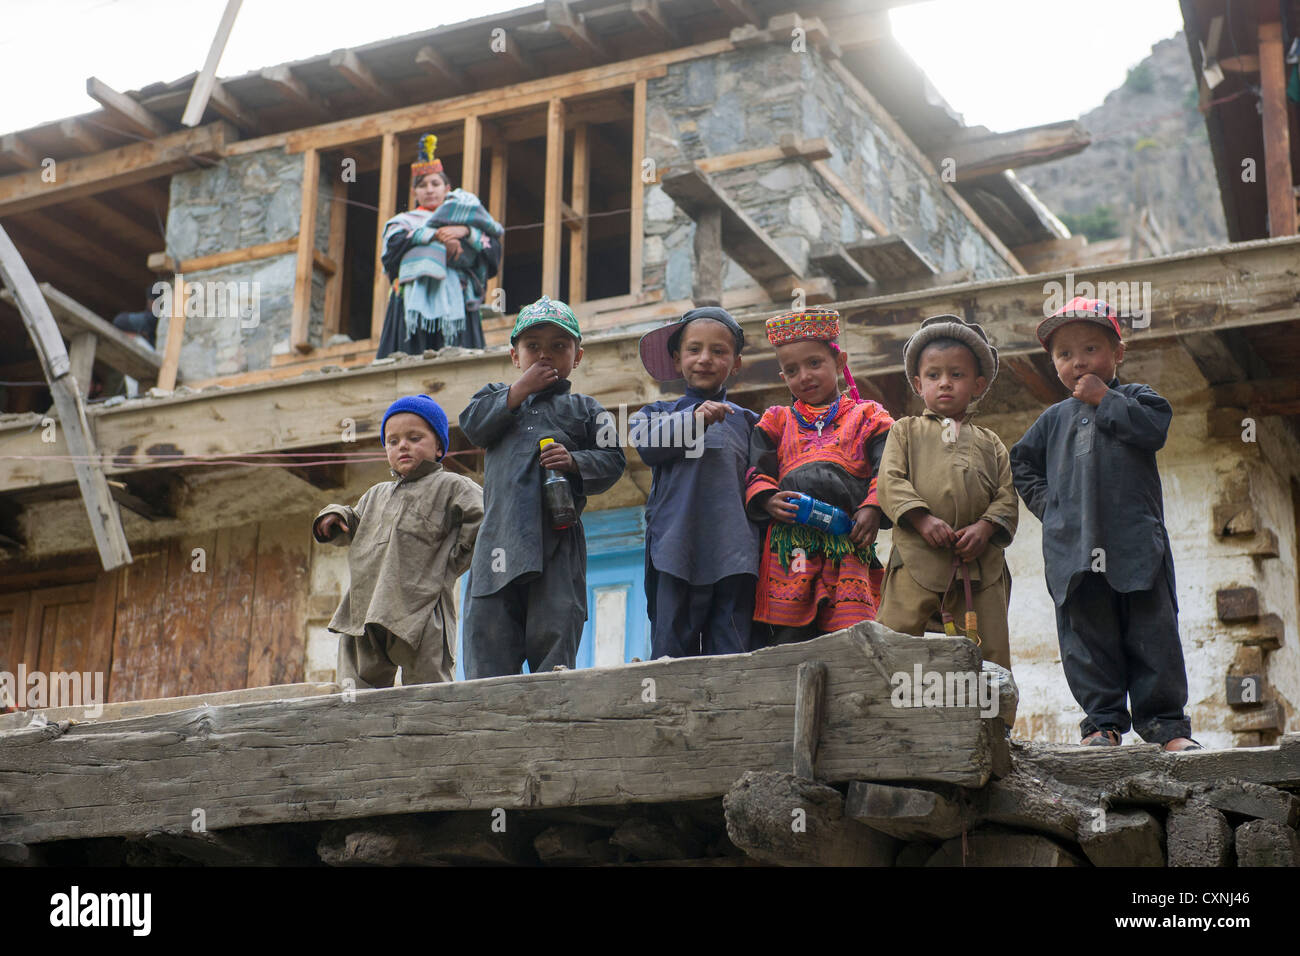 Kalash children in traditional dress on the roof of a Kalash house at Krakl Village, Bumburet Valley, Chitral, Khyber-Pakhtunkhwa, Pakistan Stock Photo